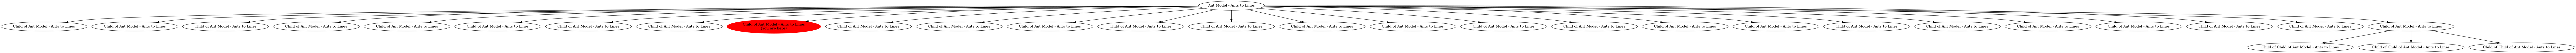 Graph of models related to 'Child of Ant Model - Ants to Lines' 